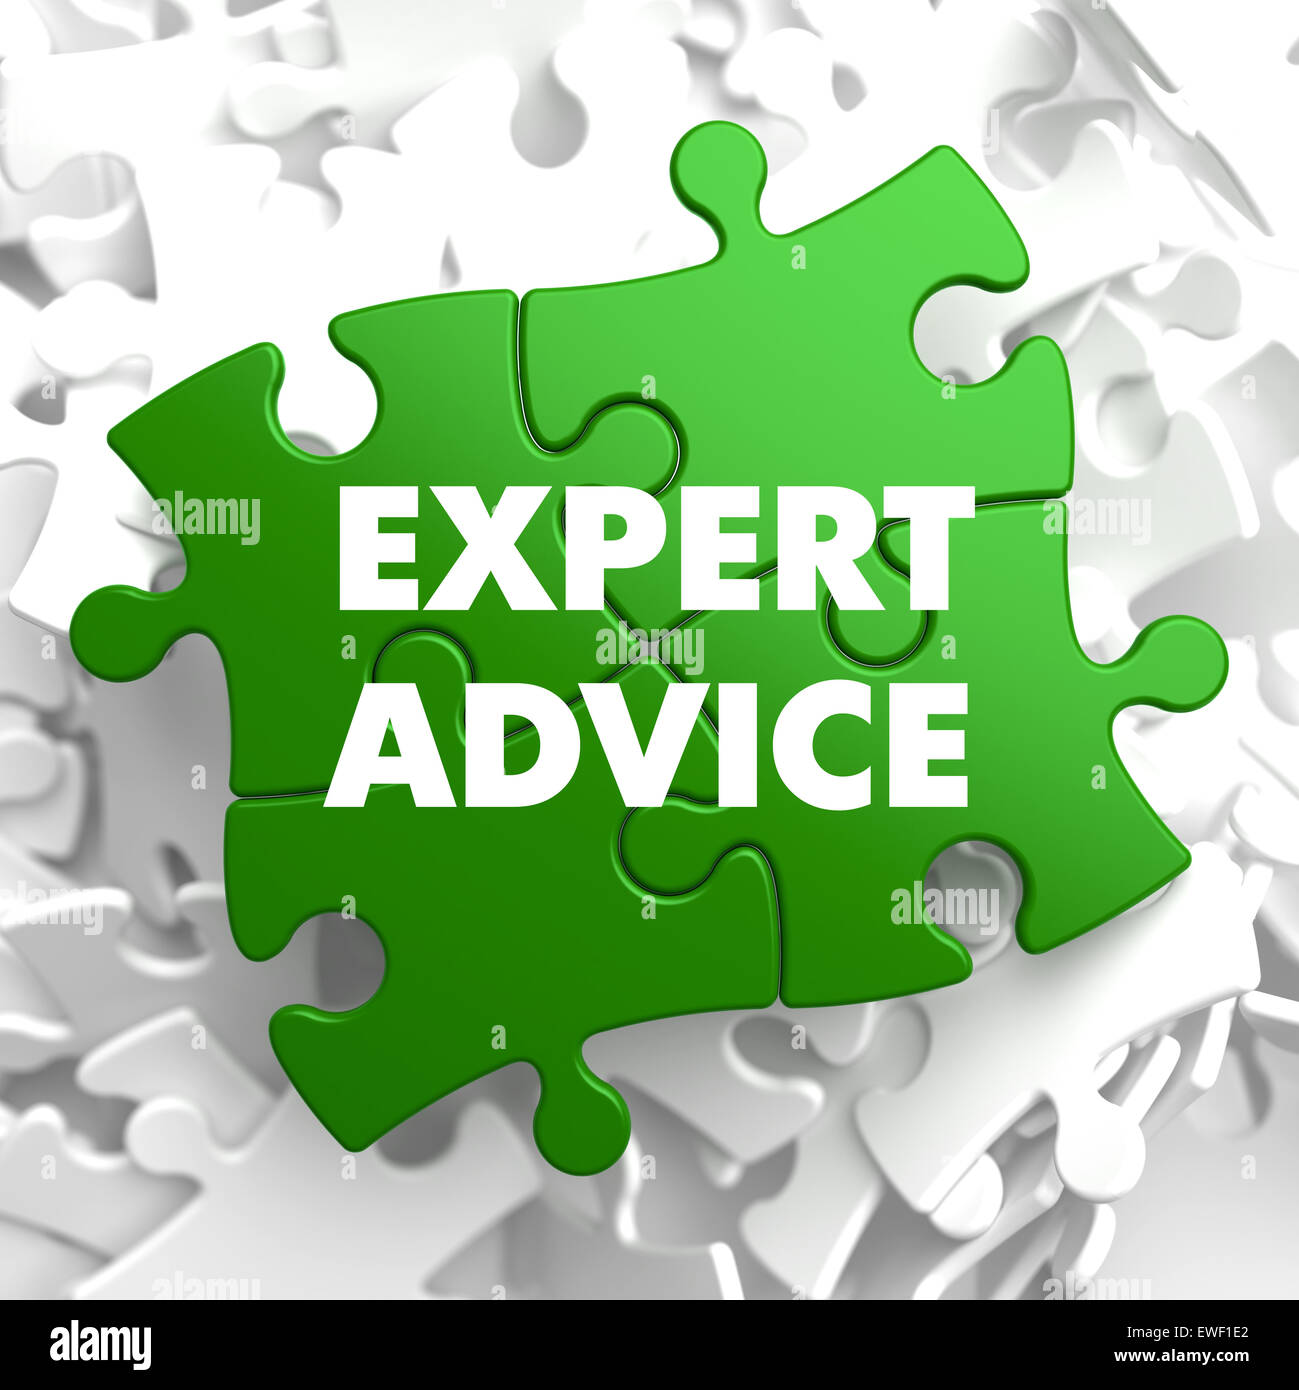 Expert Advice on Green Puzzle. Stock Photo